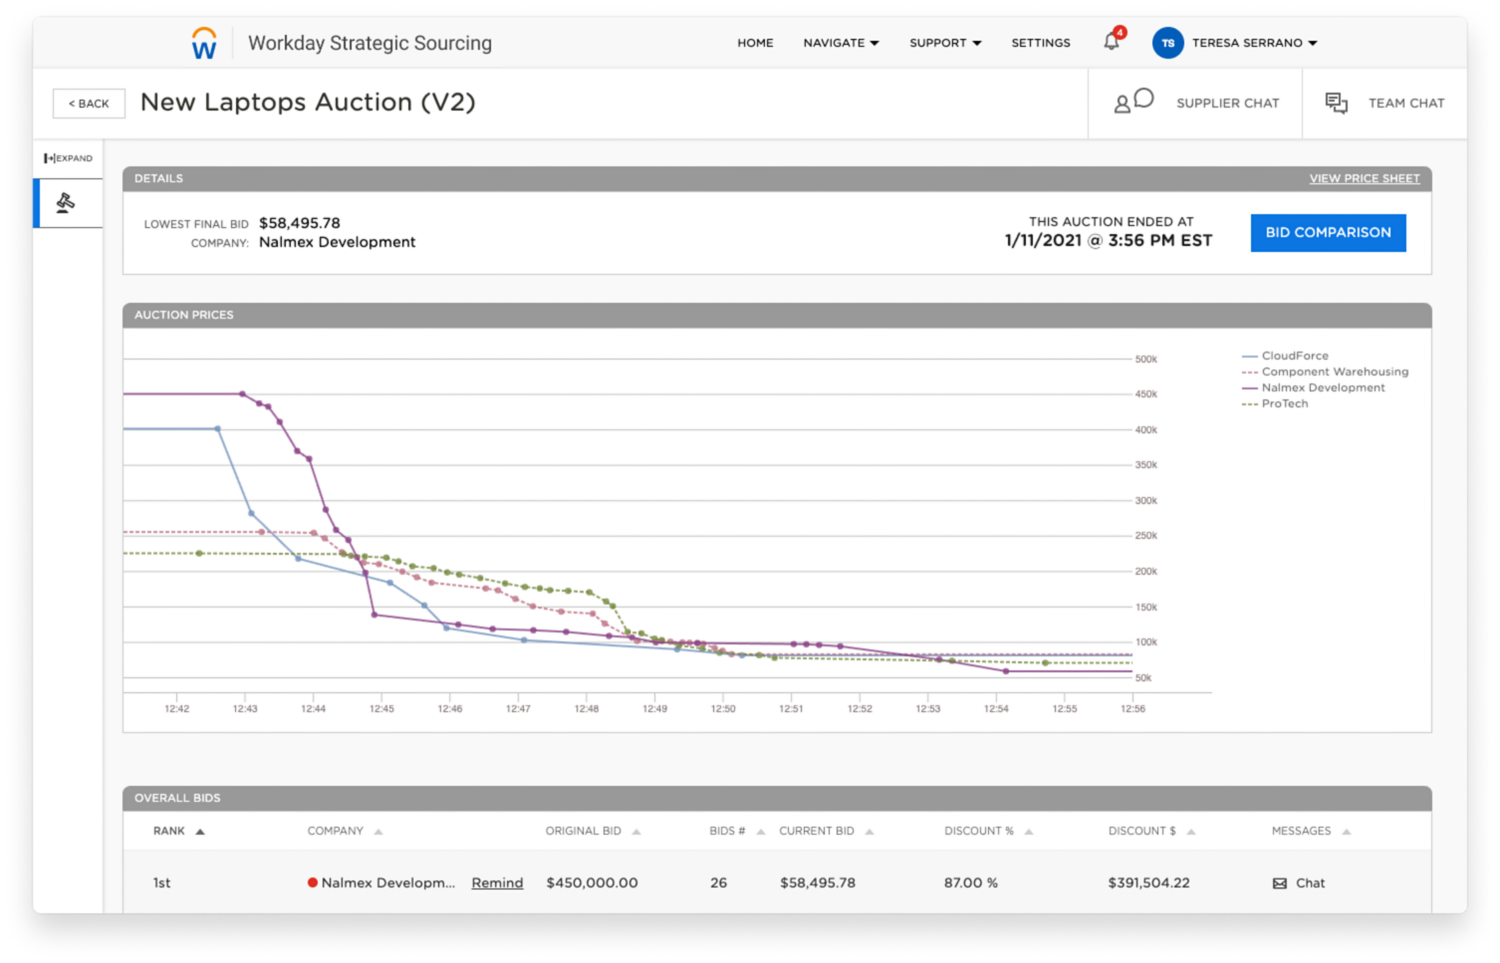 Workday Strategic Sourcing auction dashboard example for financial services industry.